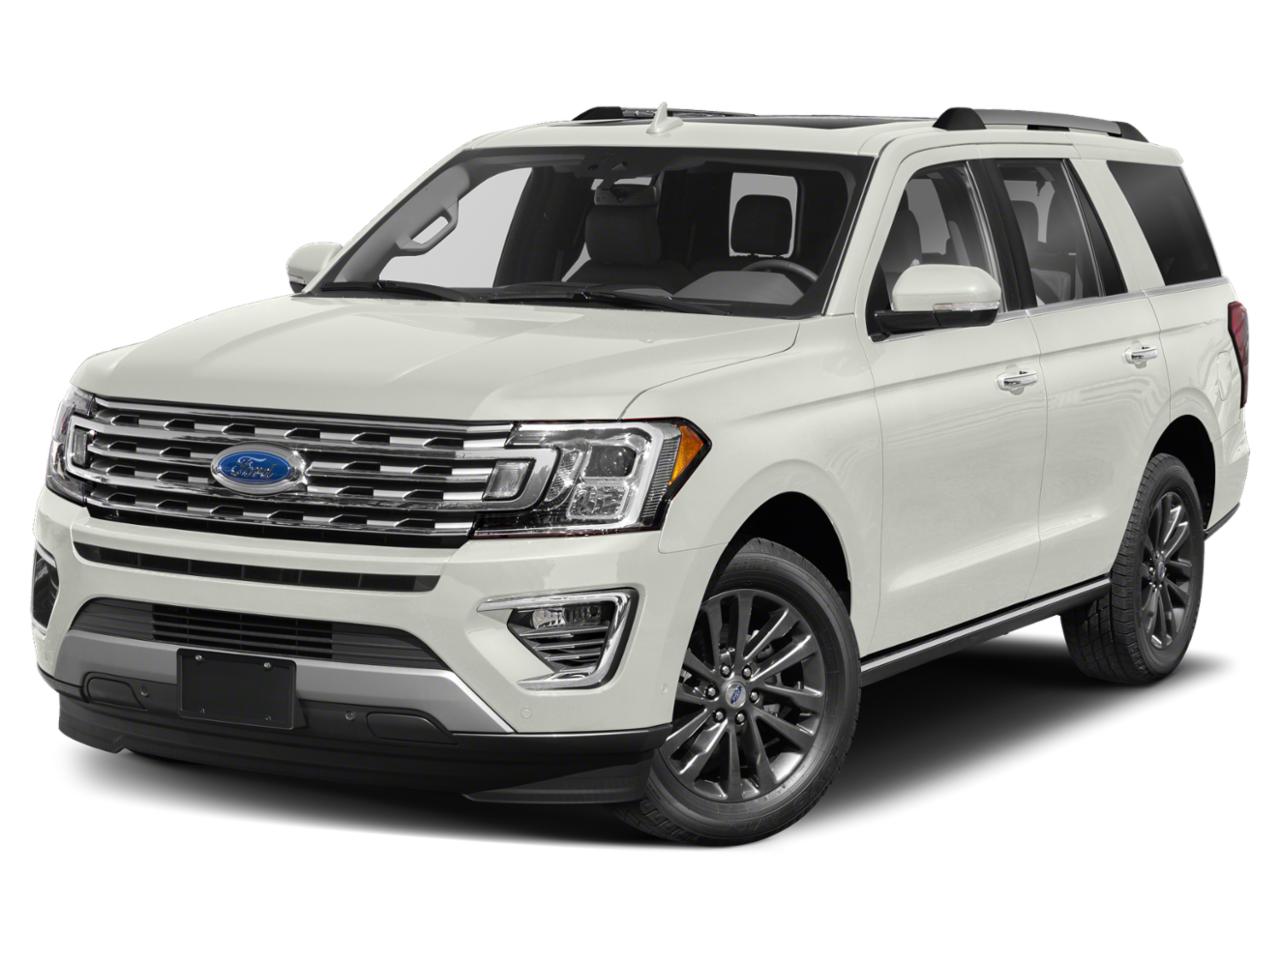 2019 Ford Expedition Vehicle Photo in Lihue, HI 96766-1424